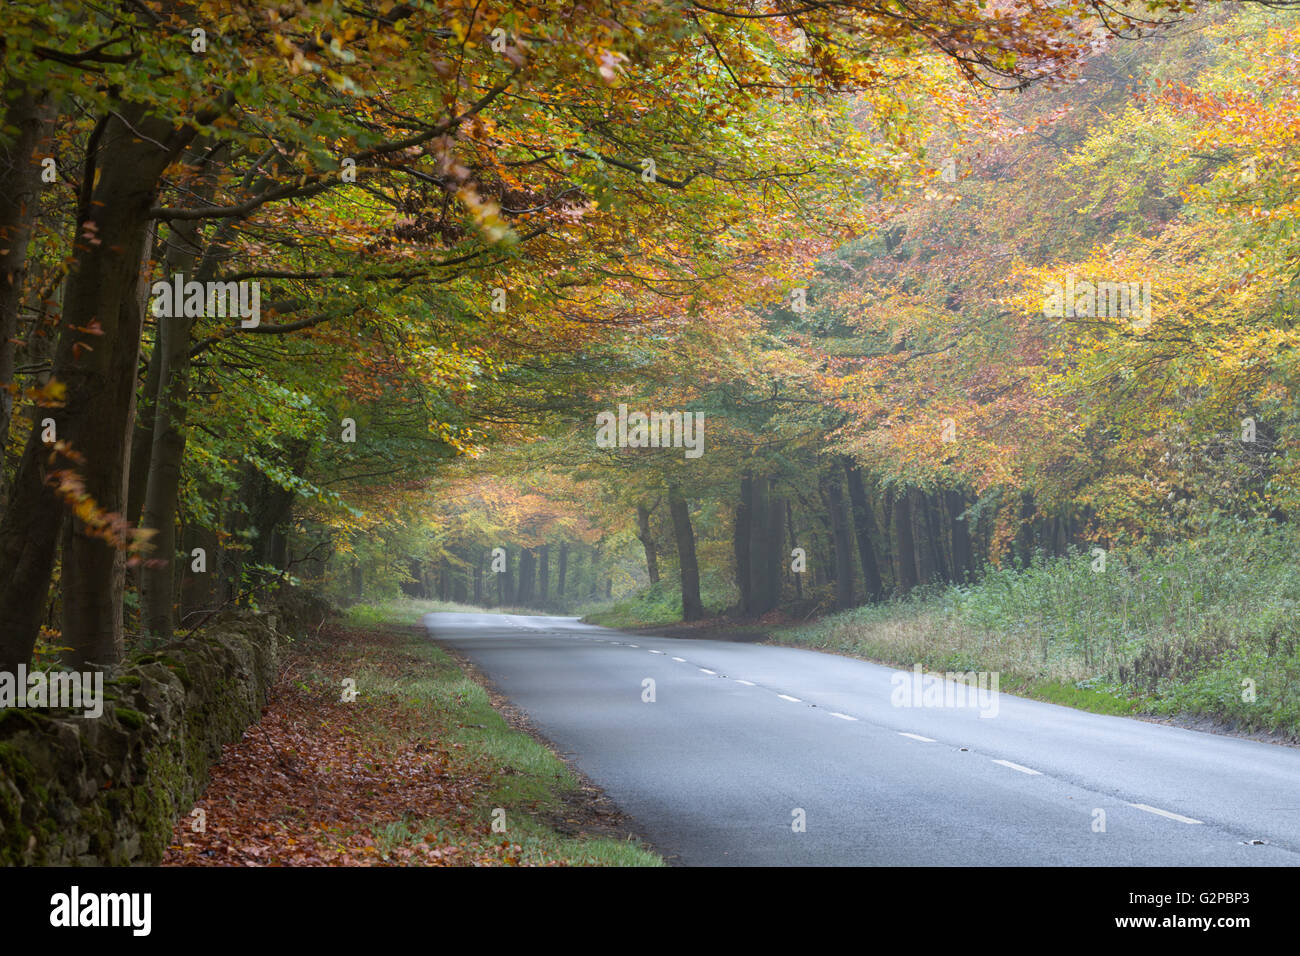 A436 road running through foggy autumnal wood, near Stow-on-the-Wold, Cotswolds, Gloucestershire, England, United Kingdom Stock Photo